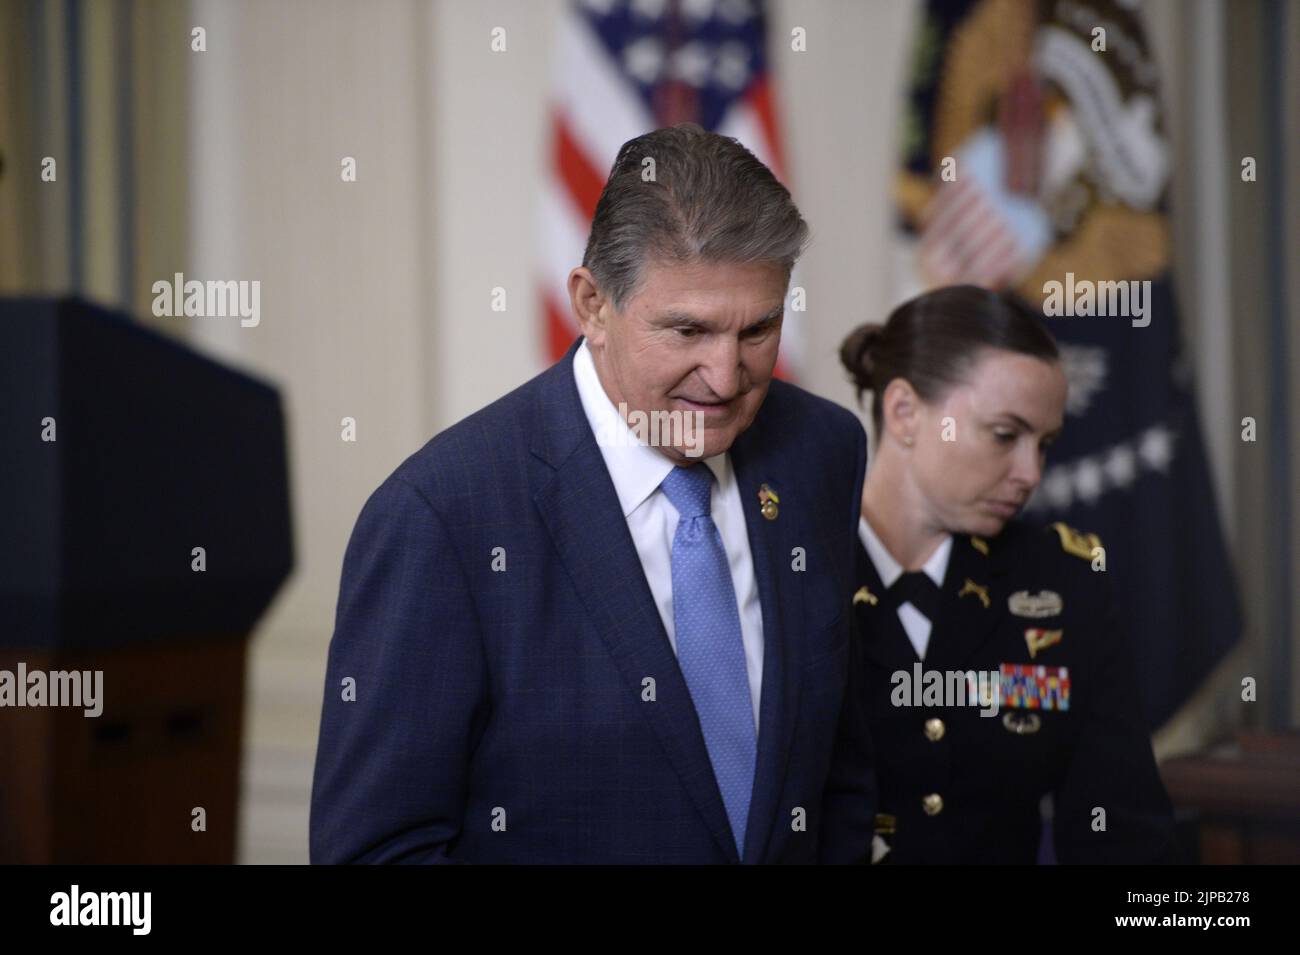 Washington, United States. 16th Aug, 2022. Sen. Joe Manchin, D-WV, arrives to the State Dining Room for a bill signing ceremony for the Inflation Reduction Act of 2022, a $737 billion act focused on slowing climate change, lowering health care costs and creating more clean energy jobs, at the White House in Washington, DC on Tuesday, August 16, 2022. Photo by Bonnie Cash/UPI Credit: UPI/Alamy Live News Stock Photo